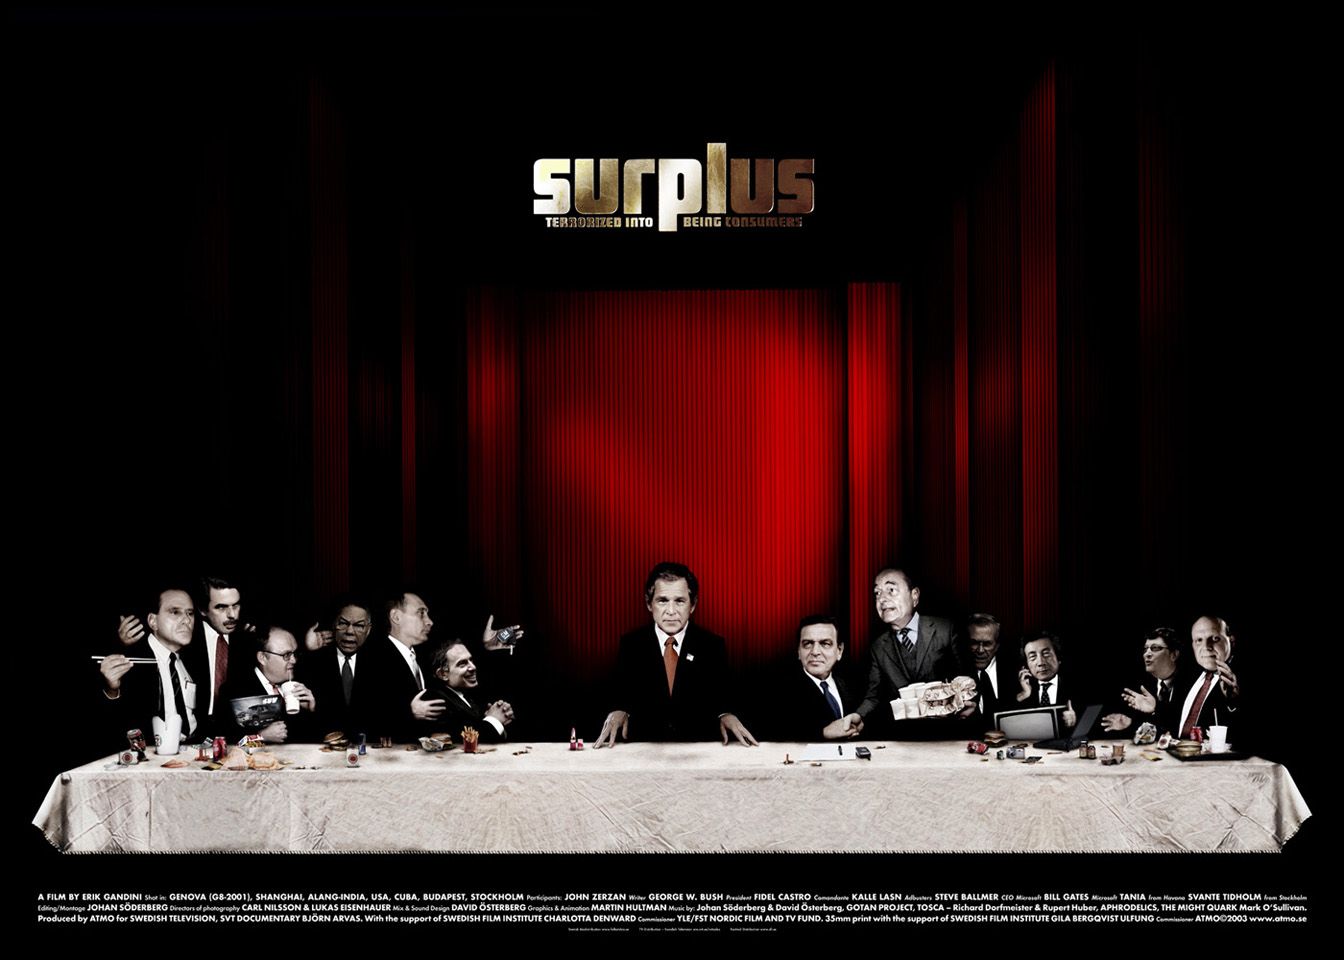 Extra Large Movie Poster Image for Surplus: Terrorized Into Being Consumers 